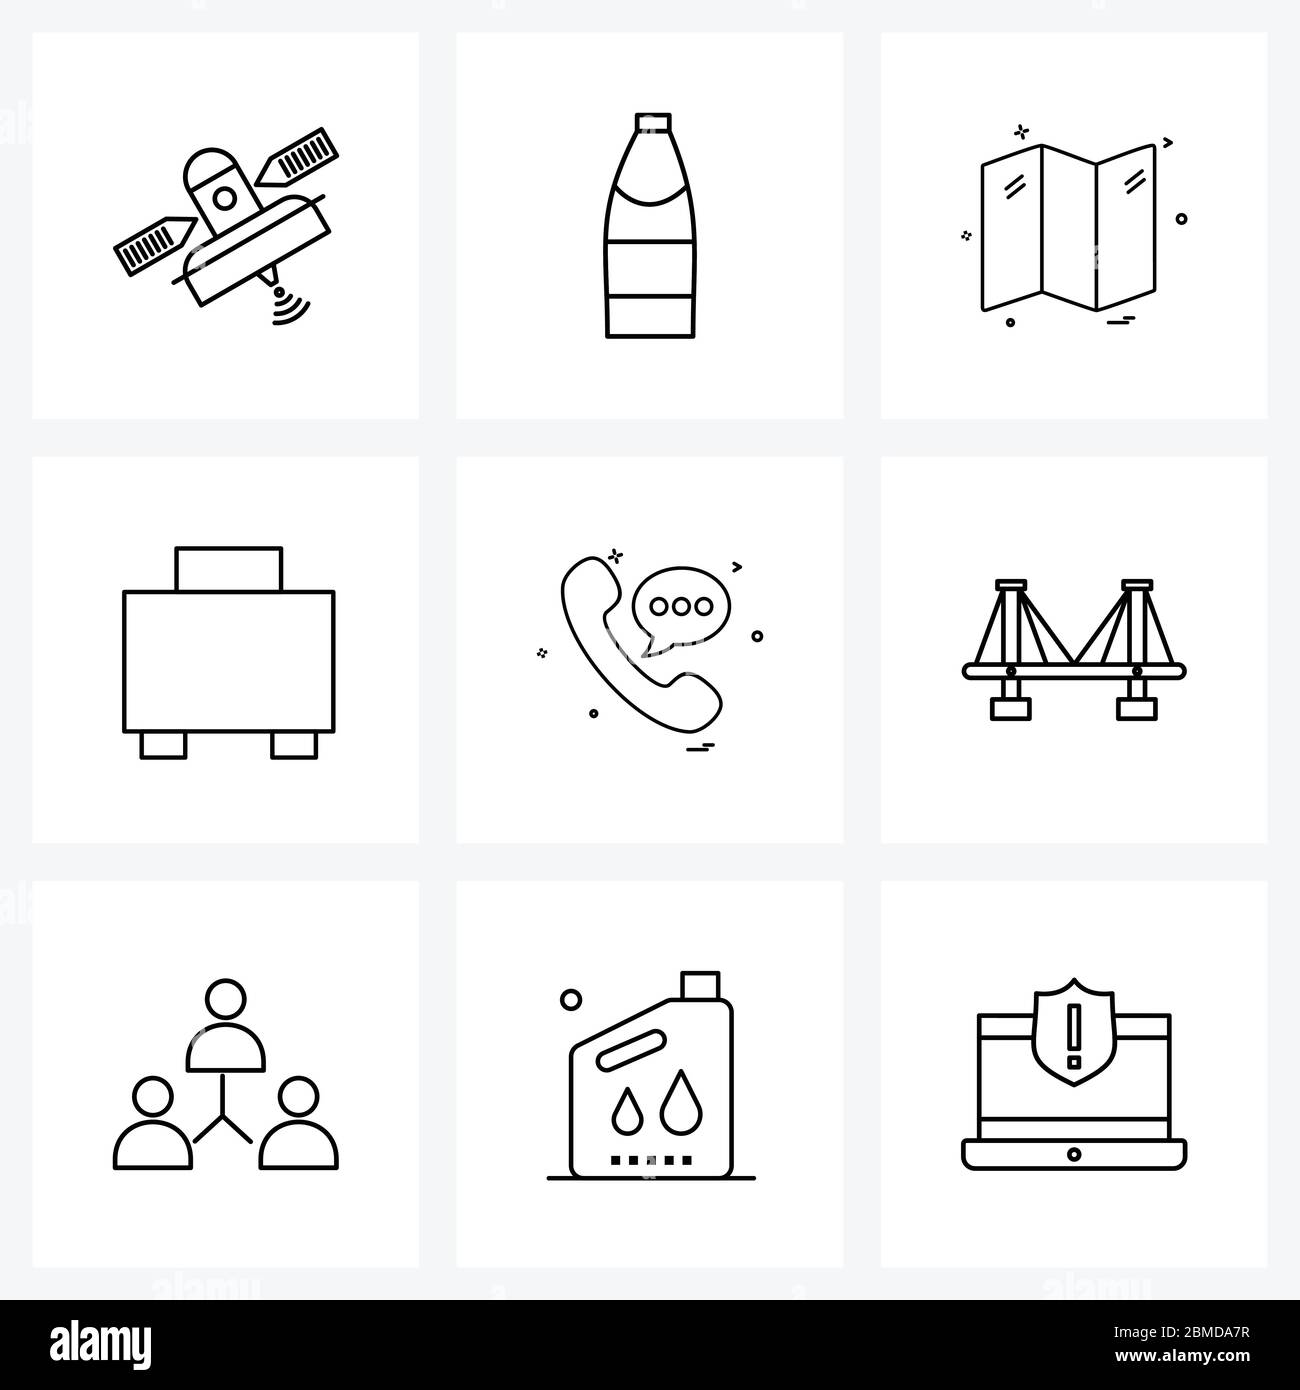 9 Editable Vector Line Icons and Modern Symbols of bridge, contact, map, phone, bag Vector Illustration Stock Vector